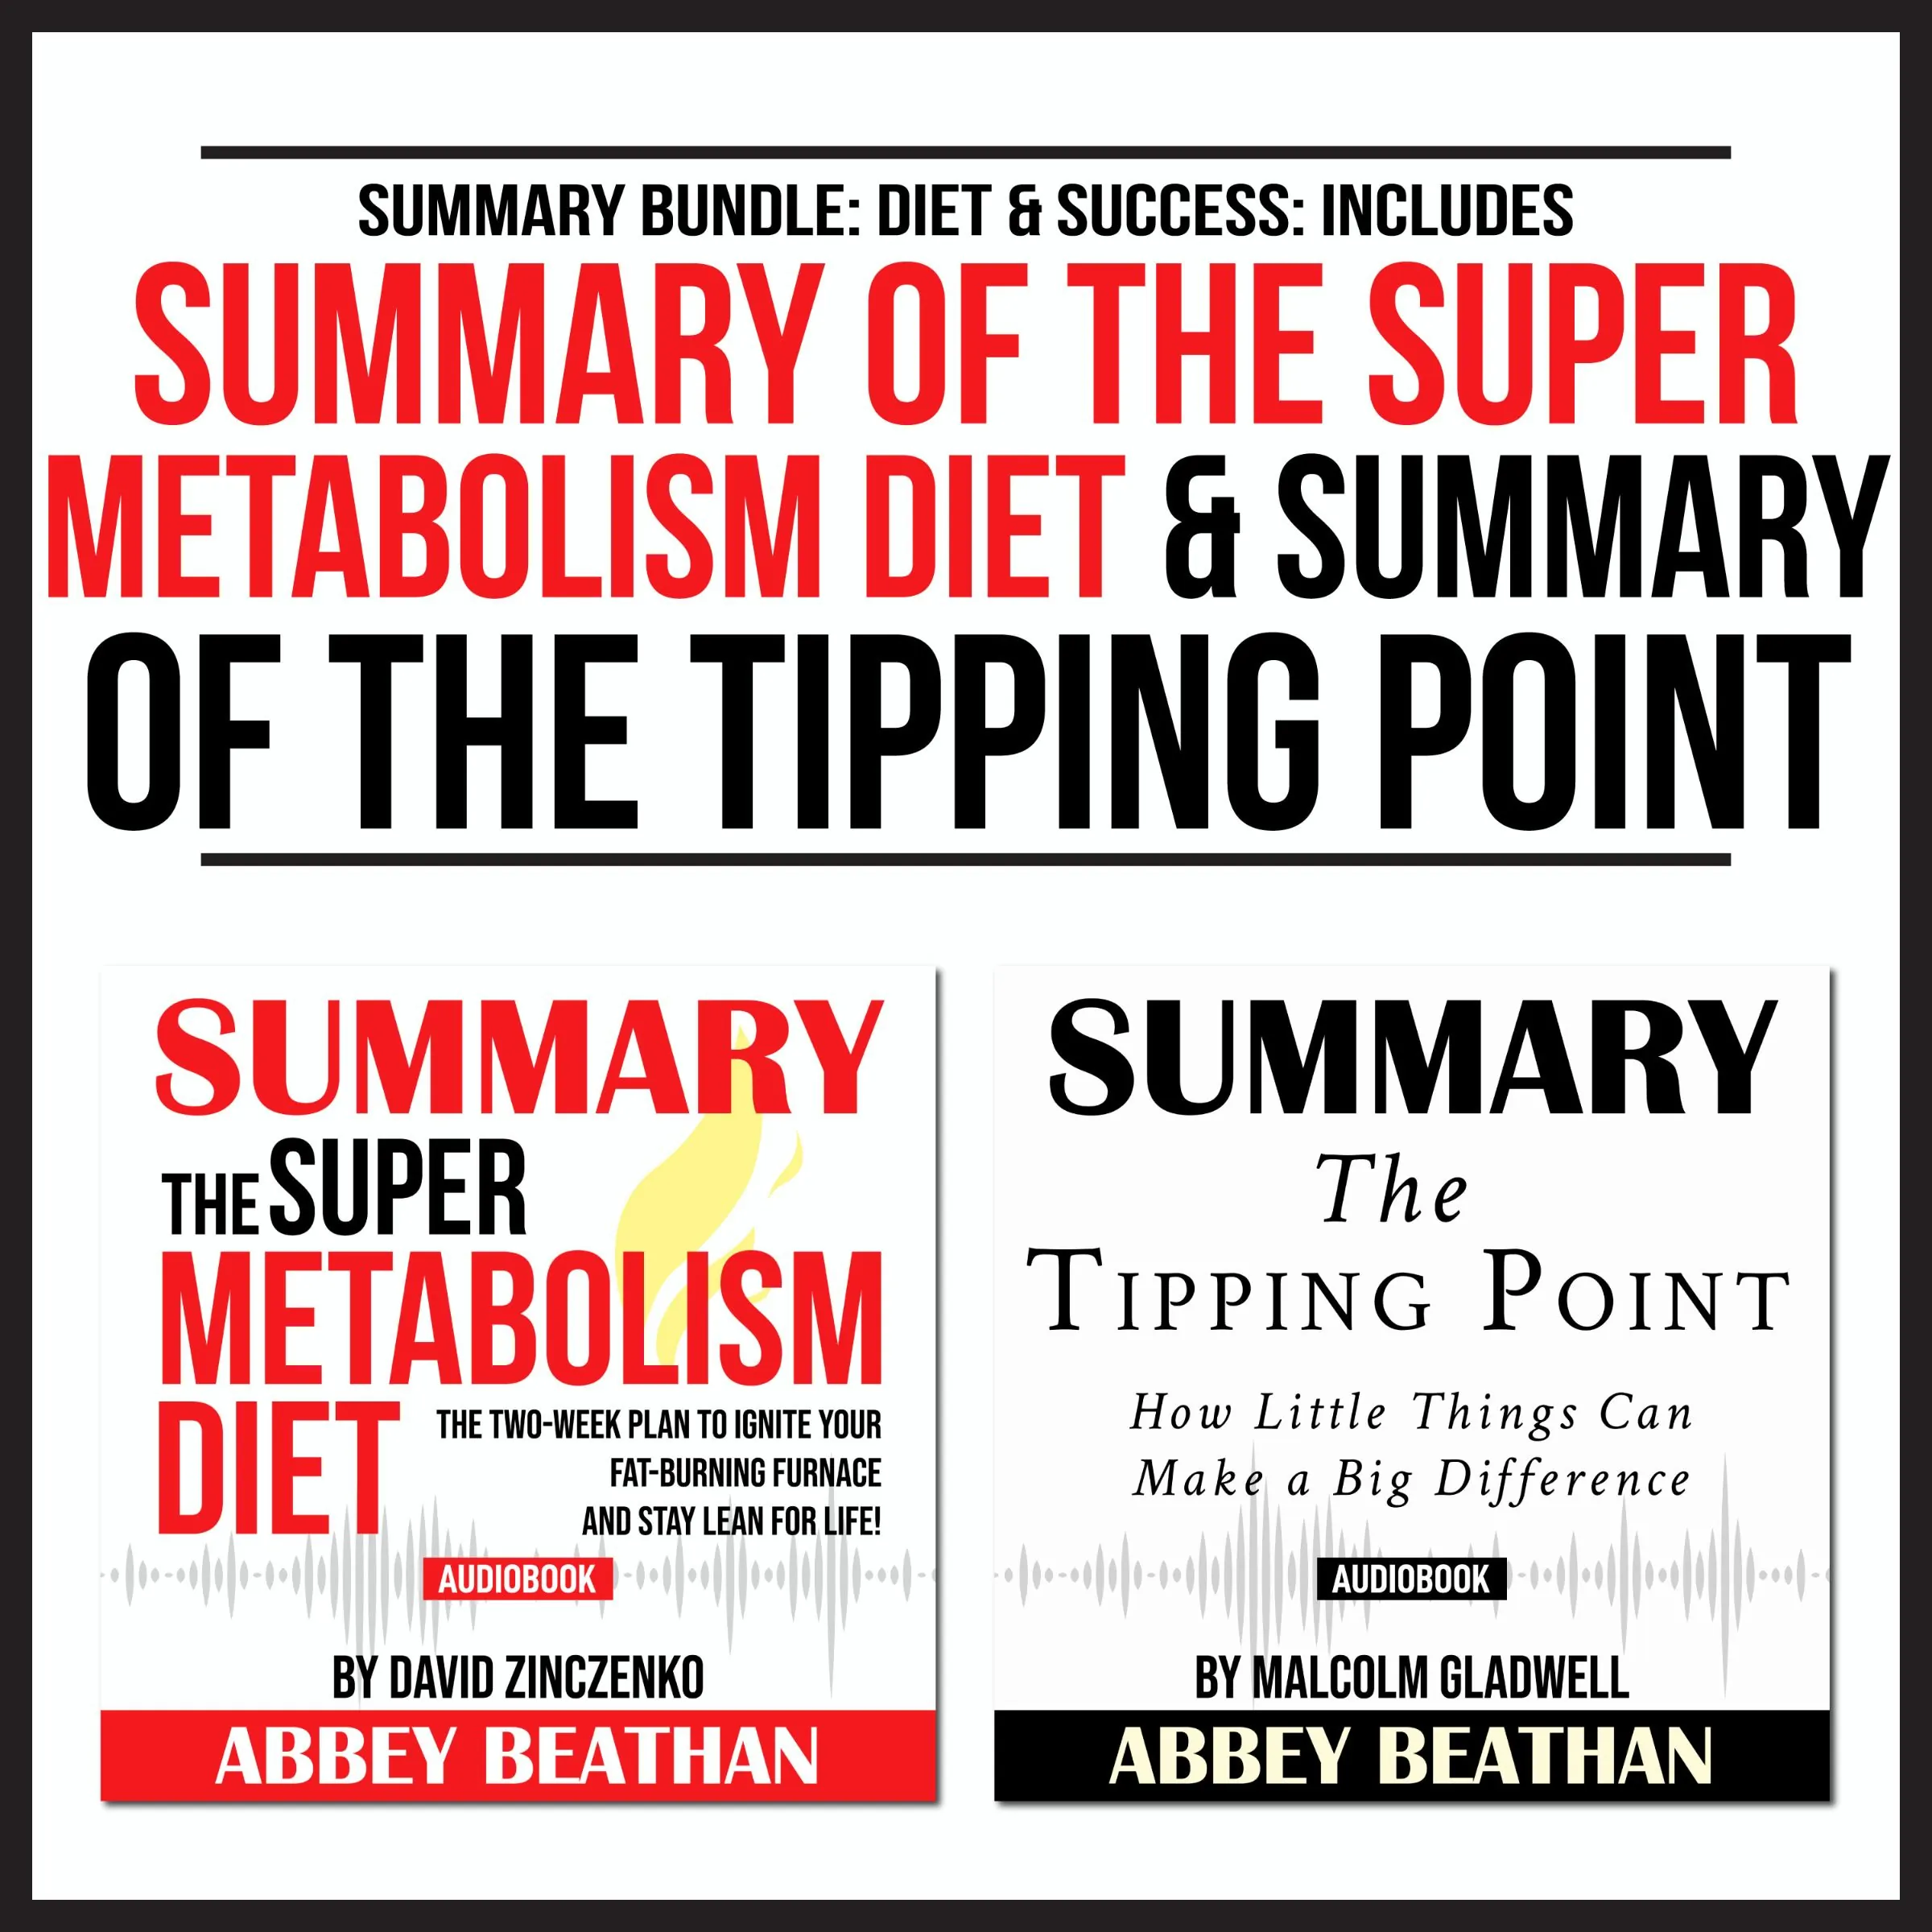 Summary Bundle: Diet & Success: Includes Summary of The Super Metabolism Diet & Summary of The Tipping Point Audiobook by Abbey Beathan